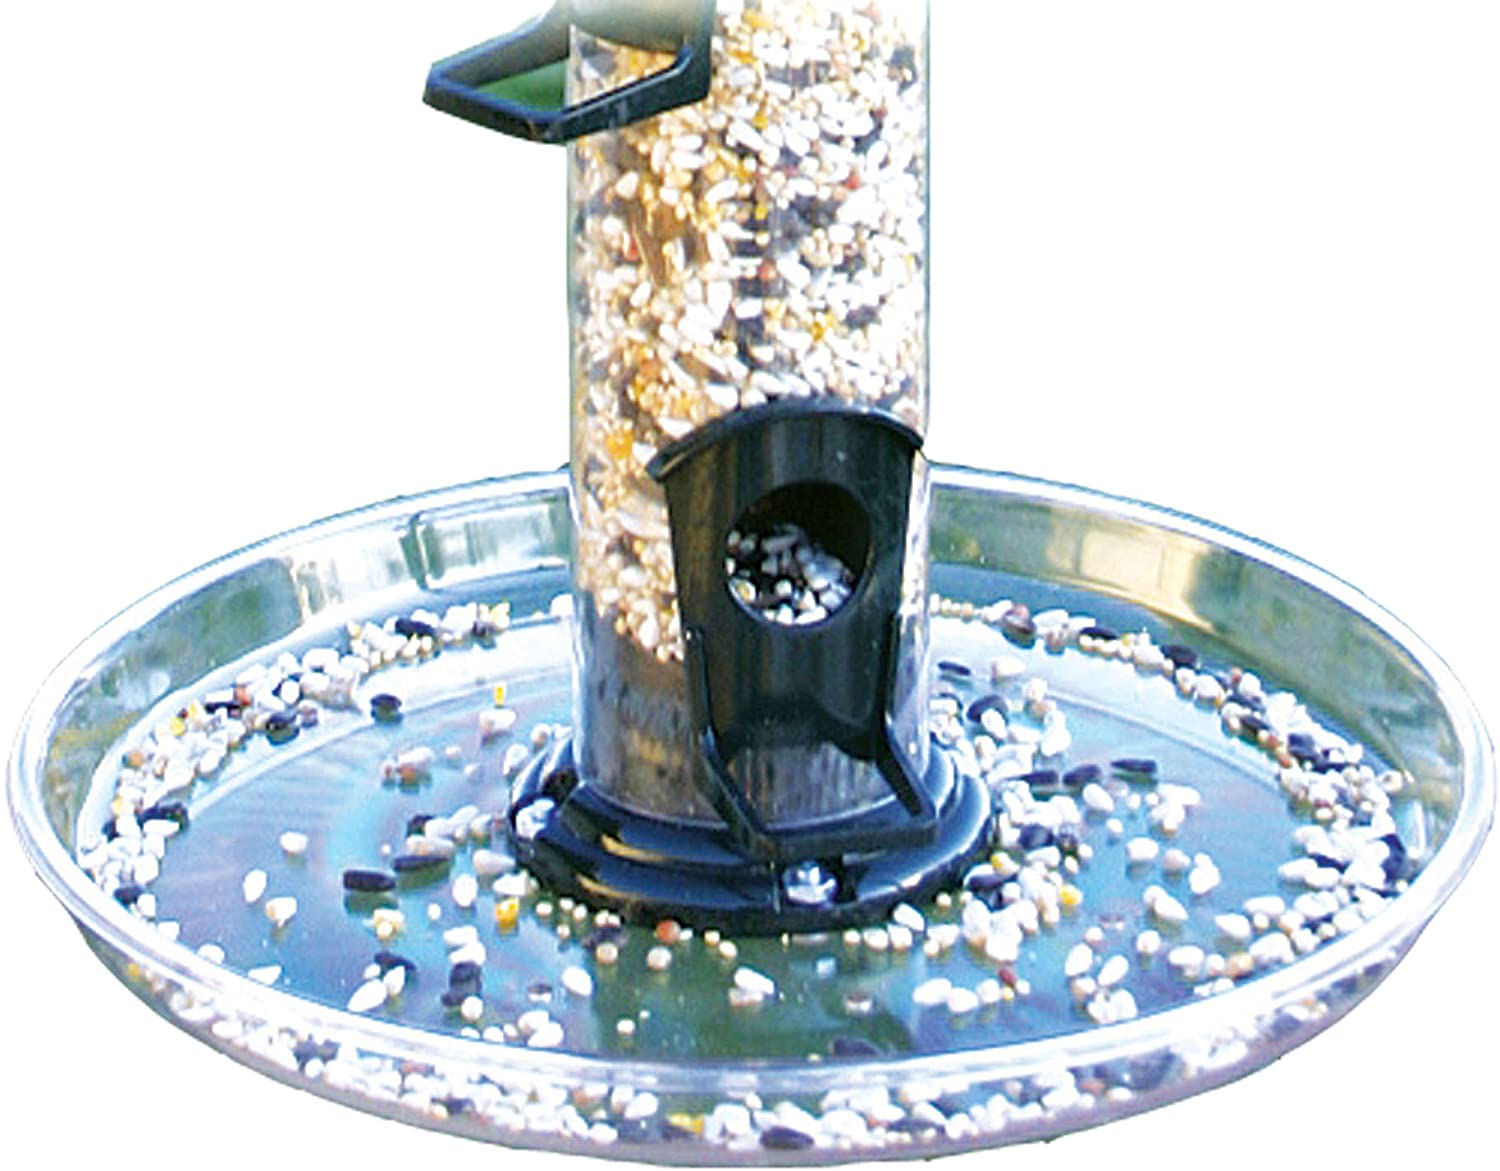 This feeder tray fits Audubon tube feeders and catches seeds that would nor...